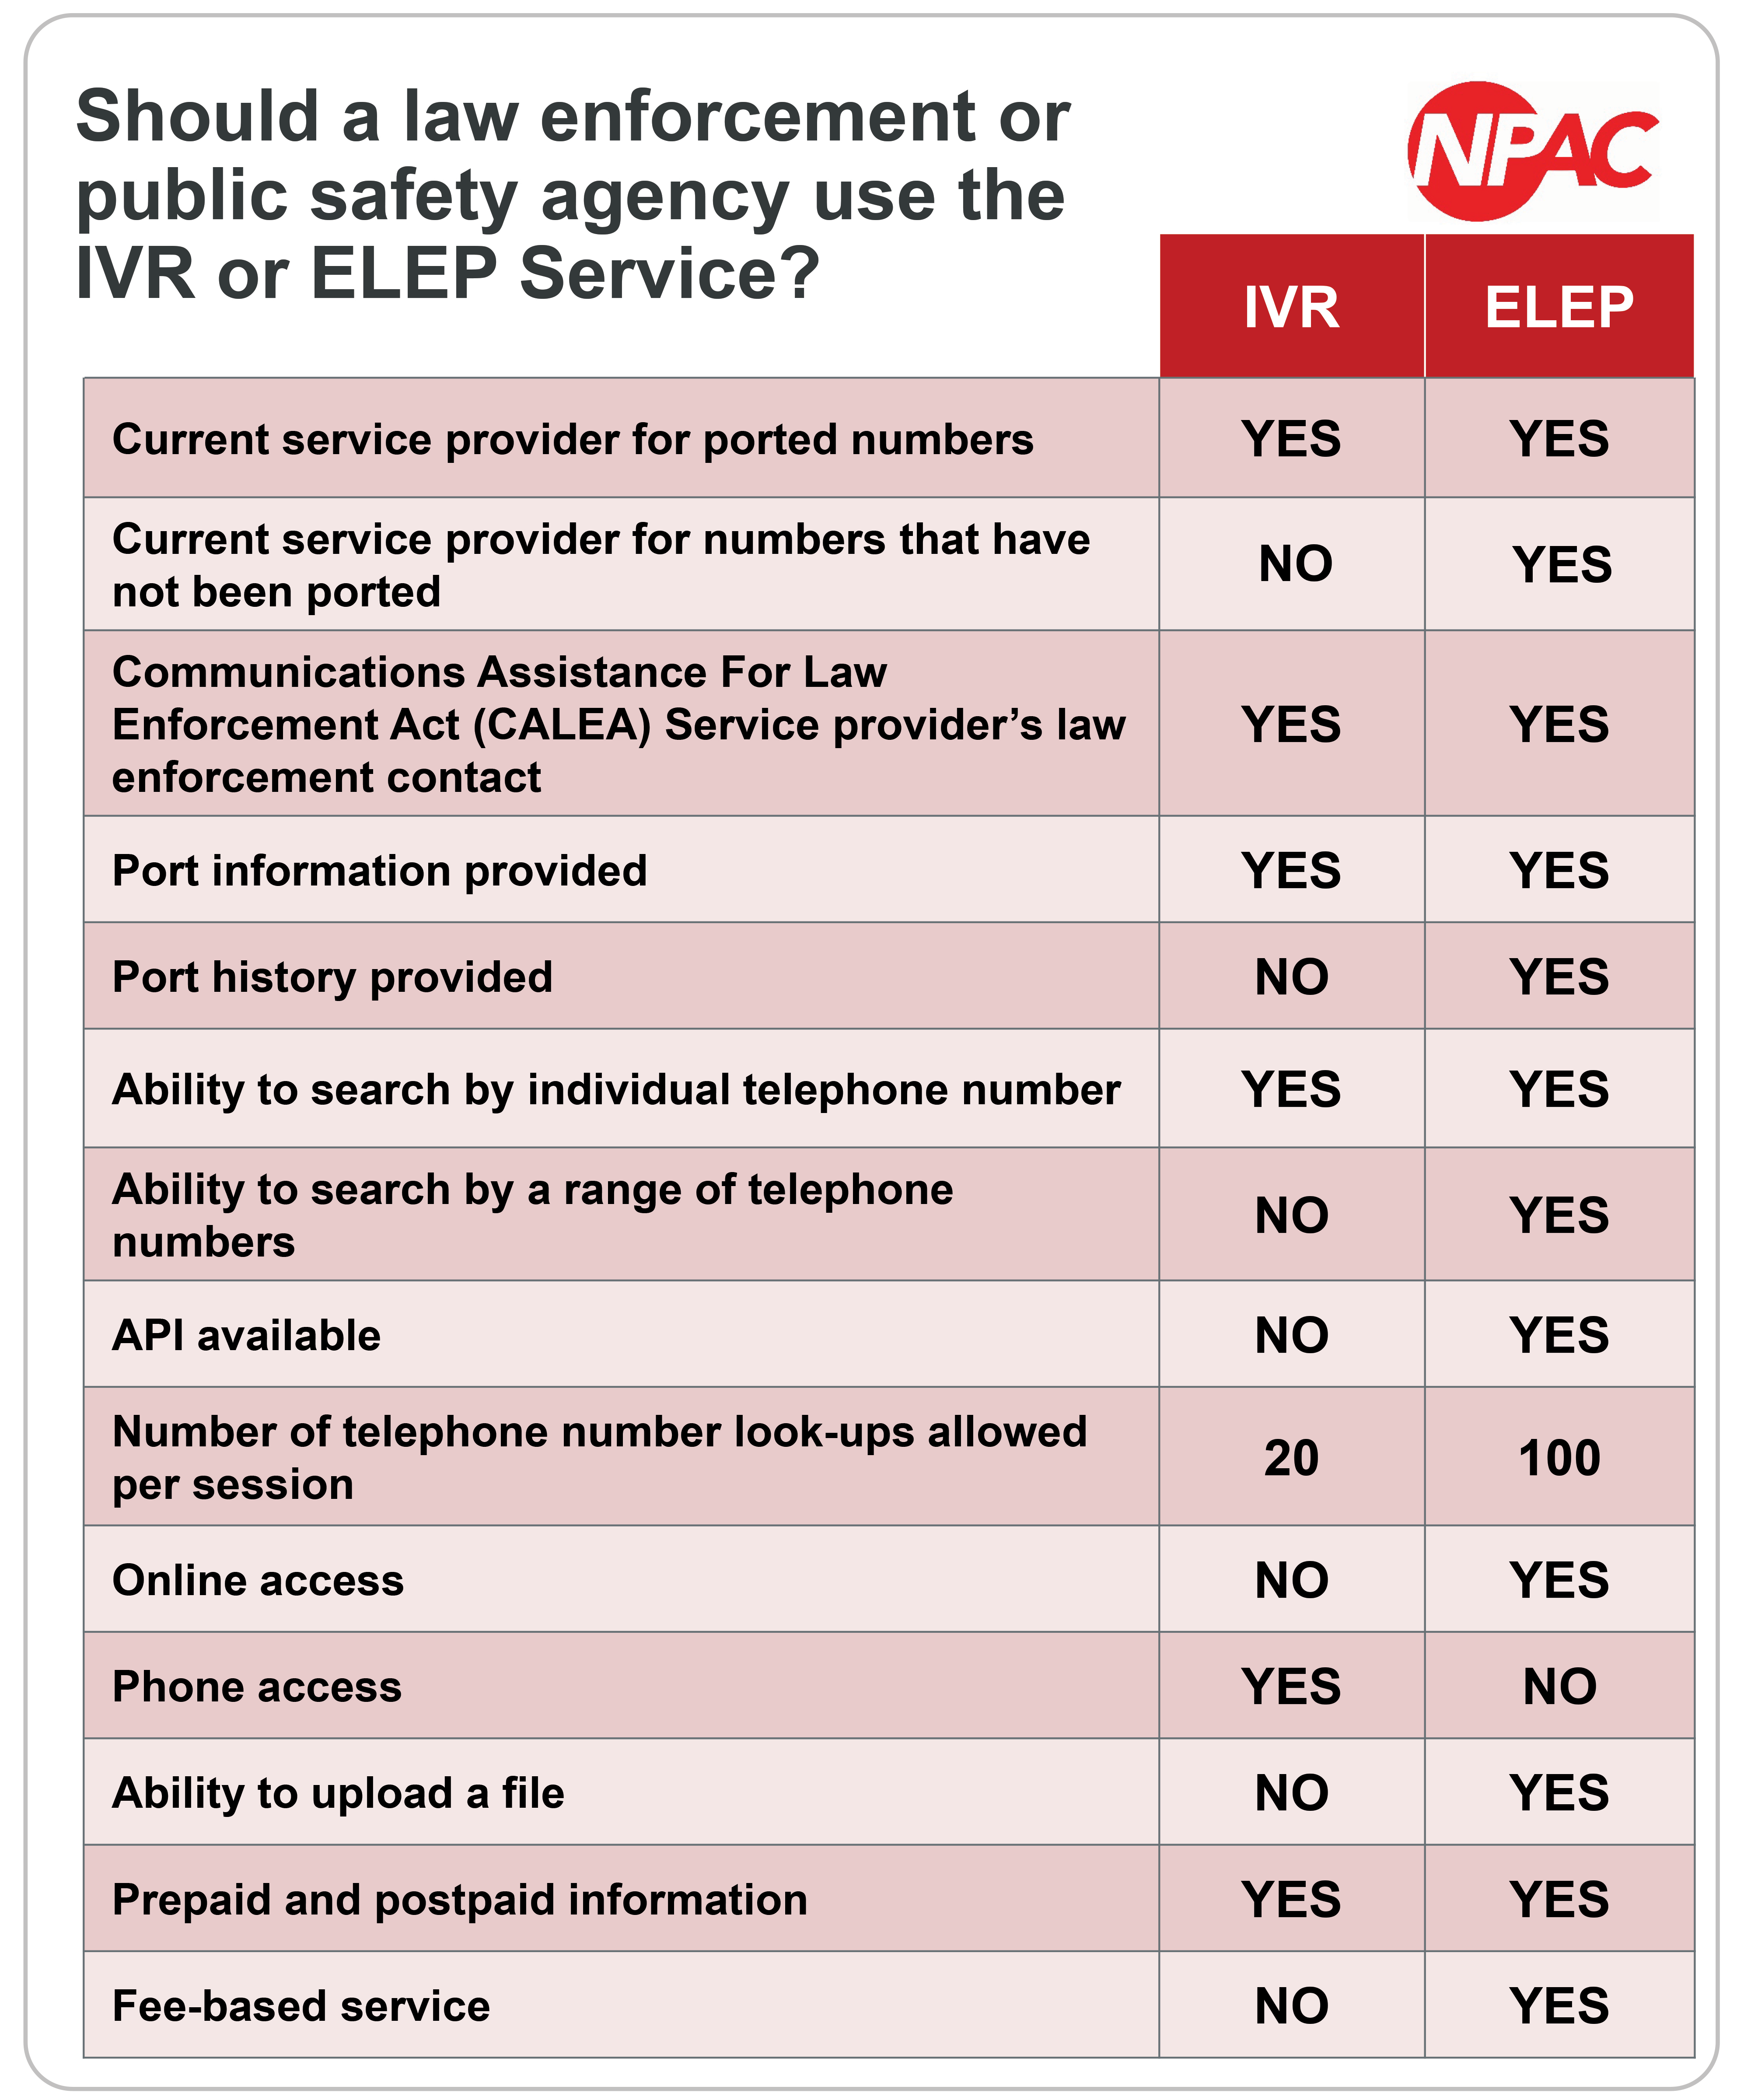 chart showing elep and ivr info side-by-side